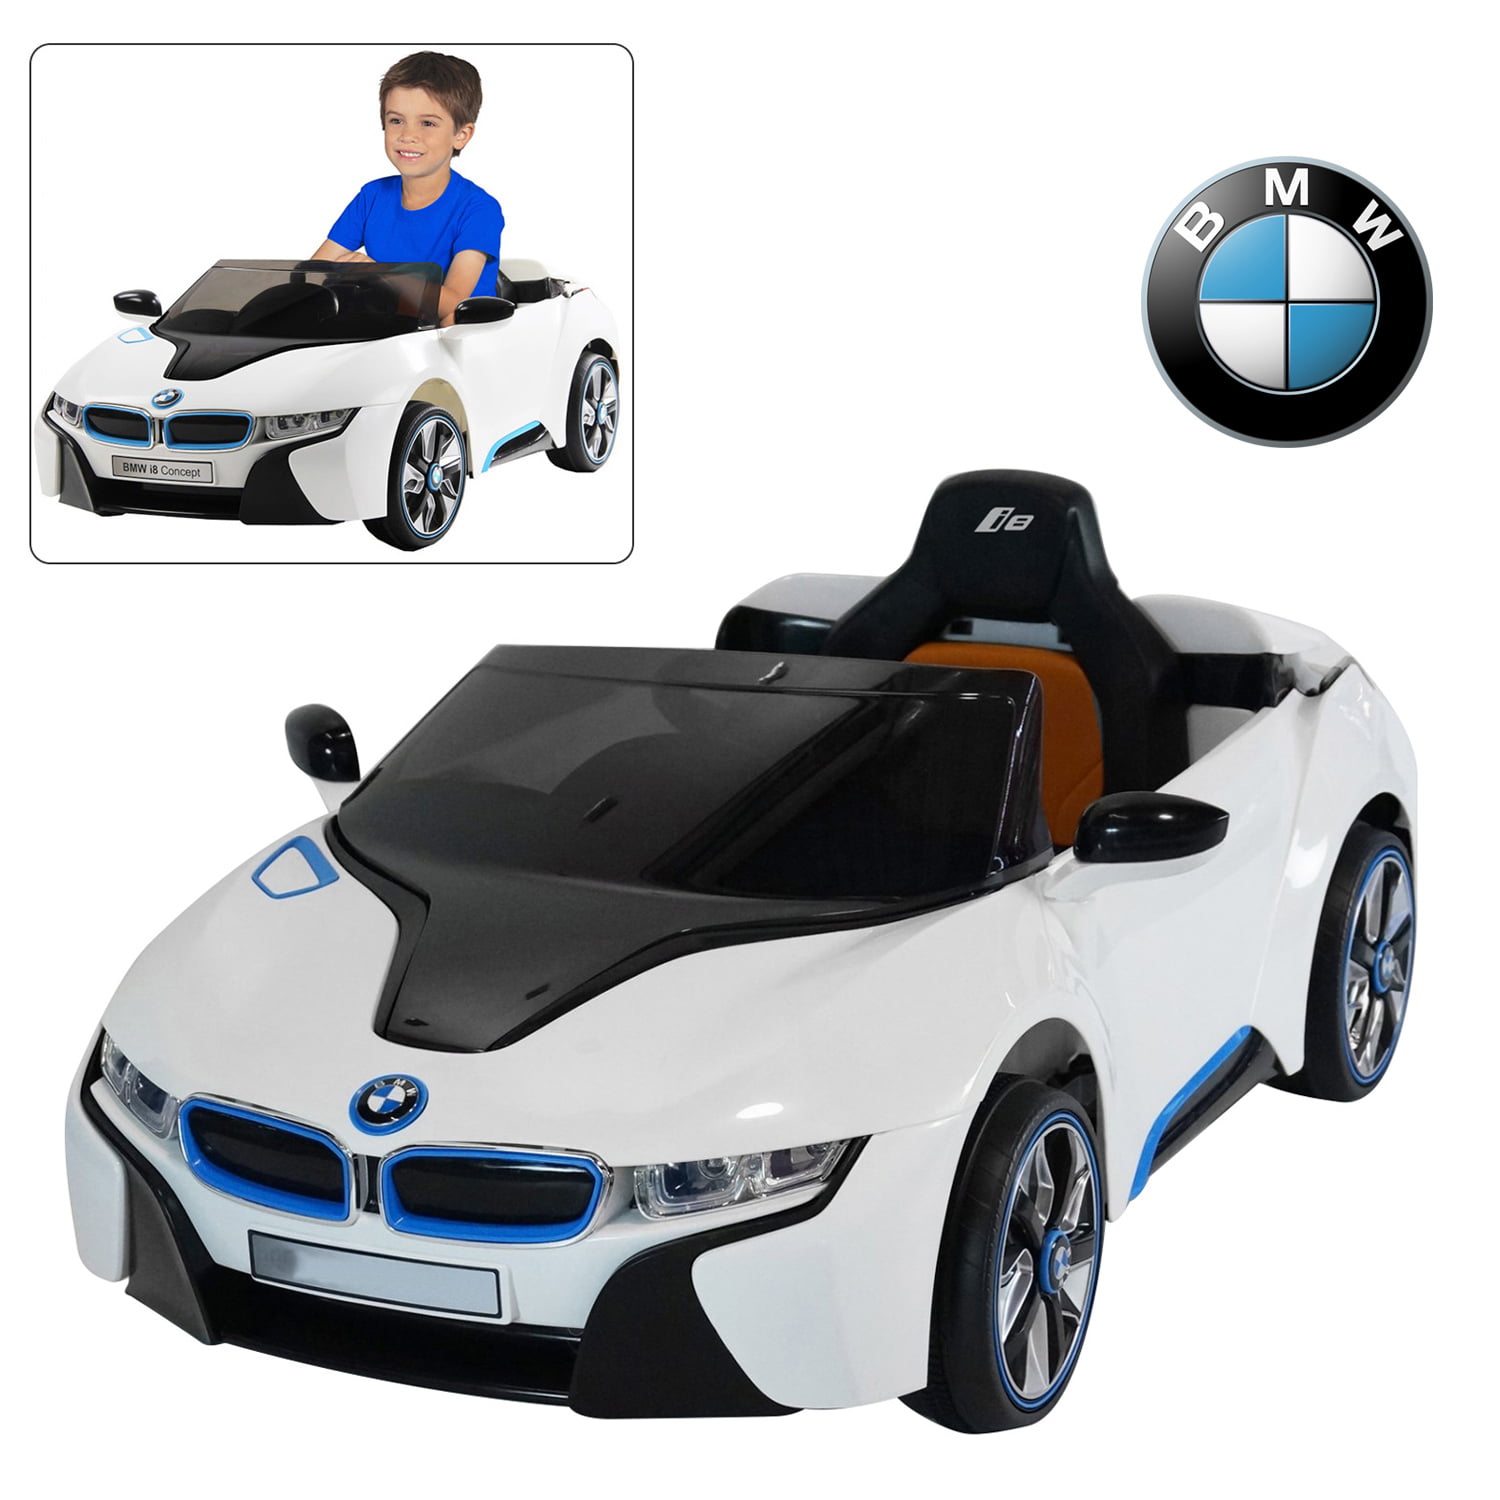 official bmw ride on car